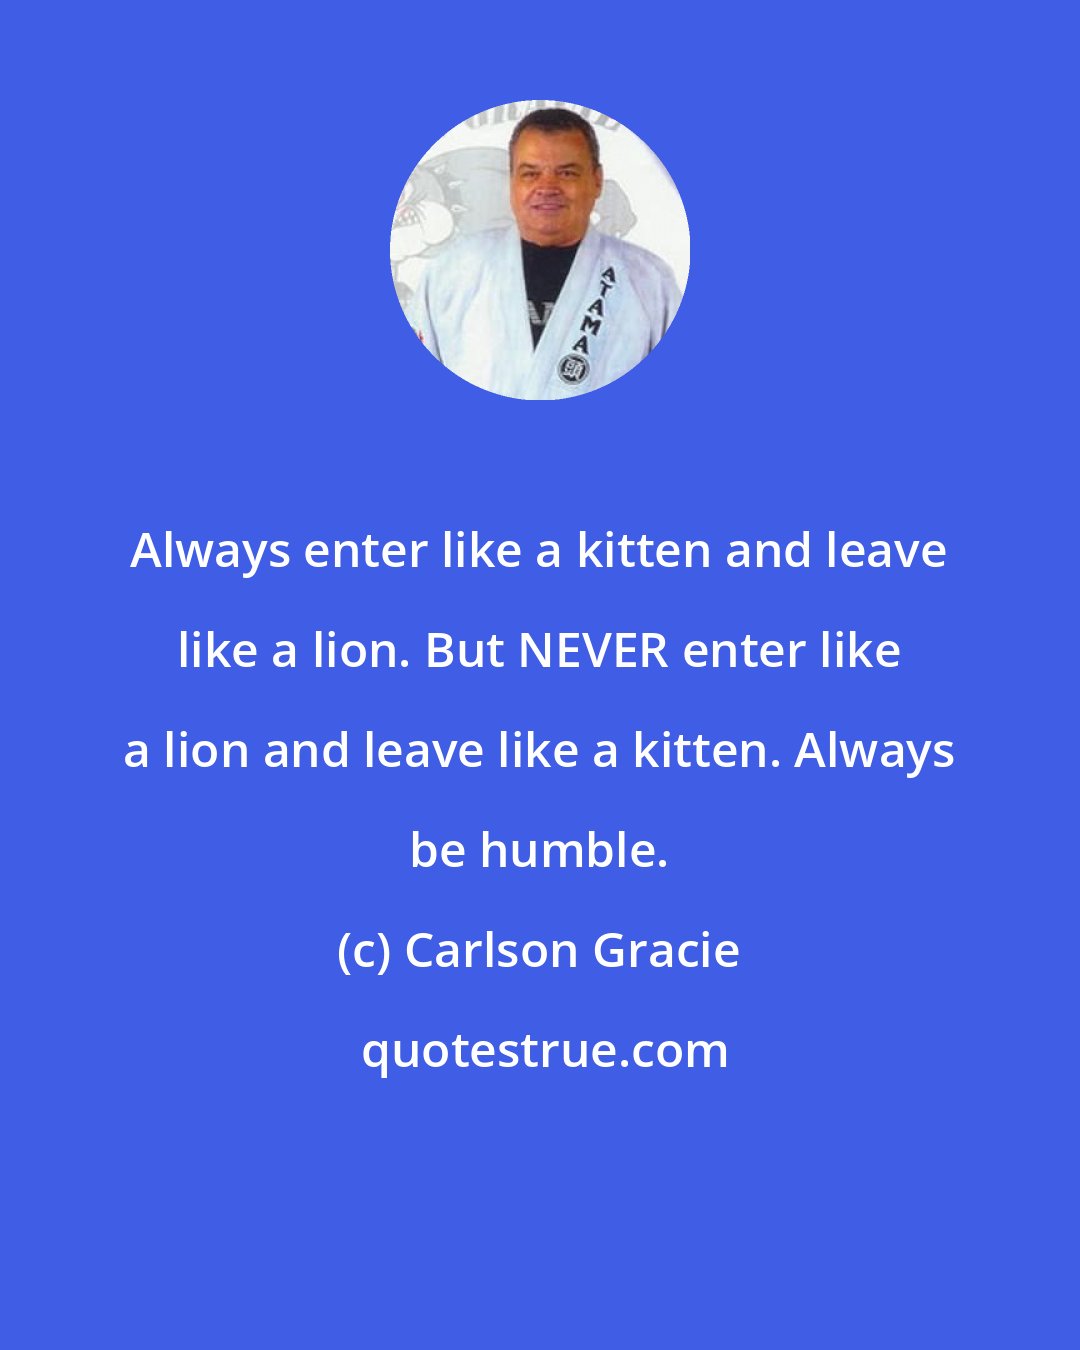 Carlson Gracie: Always enter like a kitten and leave like a lion. But NEVER enter like a lion and leave like a kitten. Always be humble.